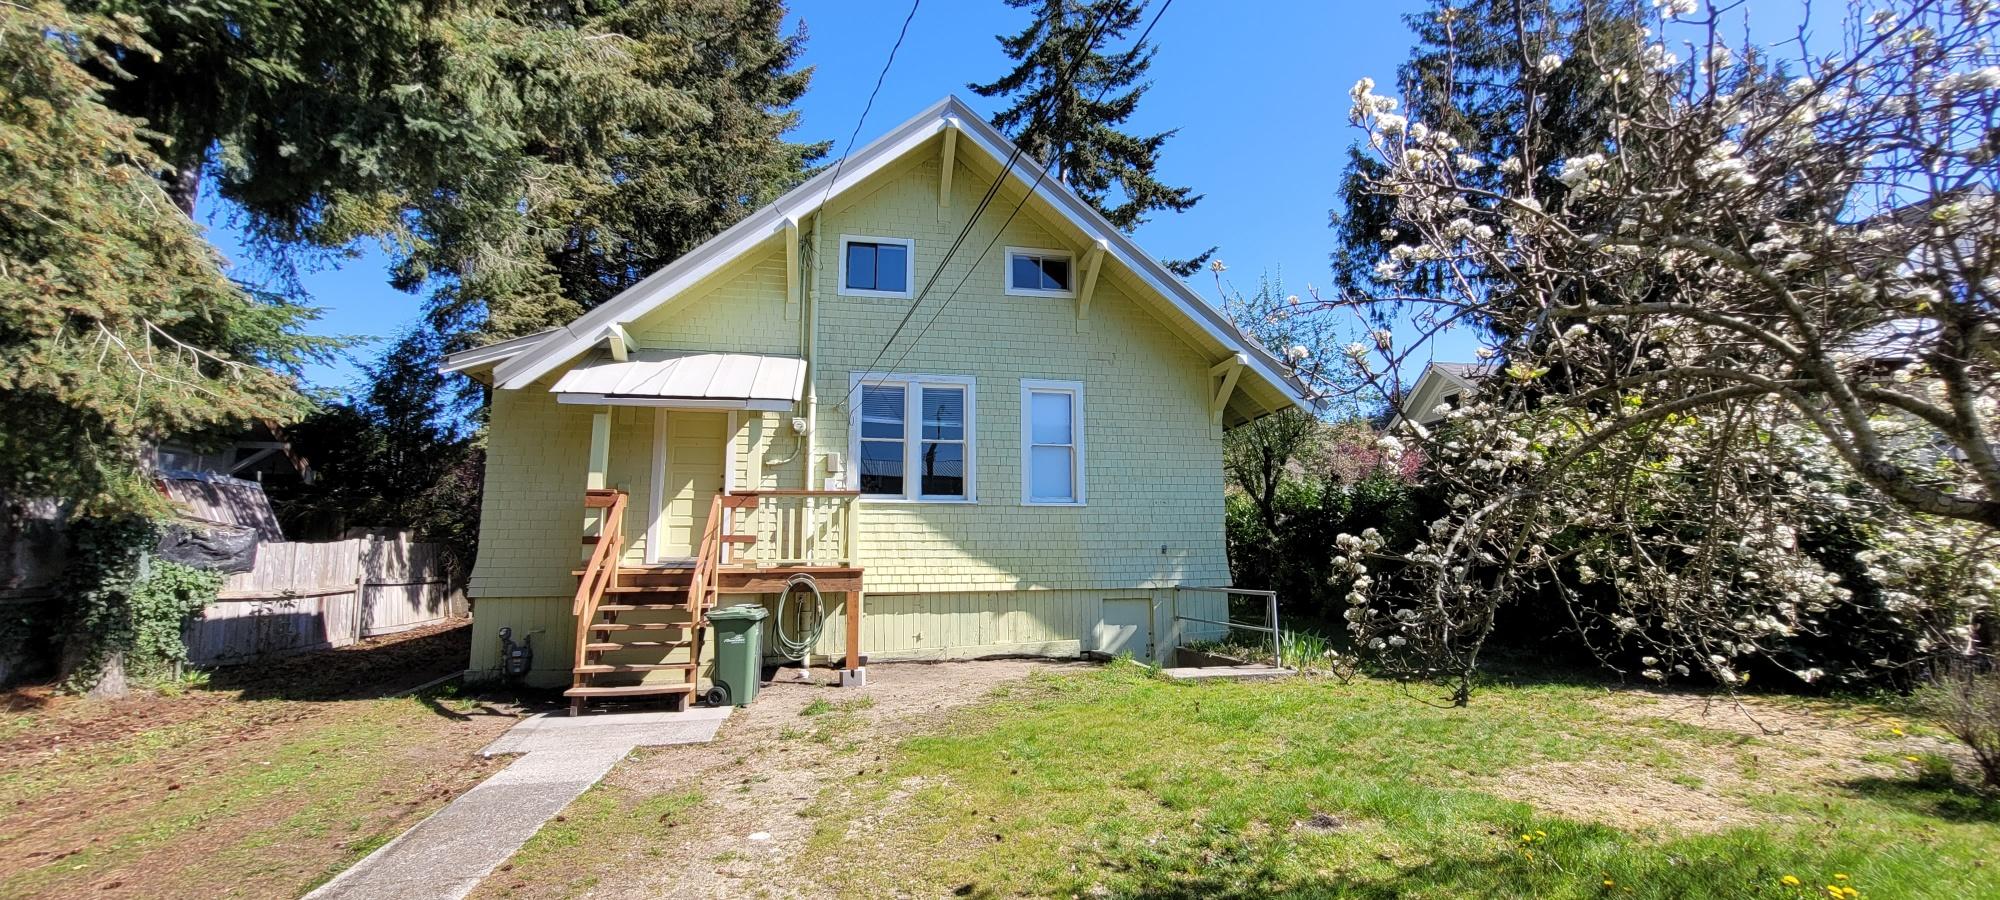 












6266 Sycamore Ave

,
Powell River,




BC
V8A 4K7

